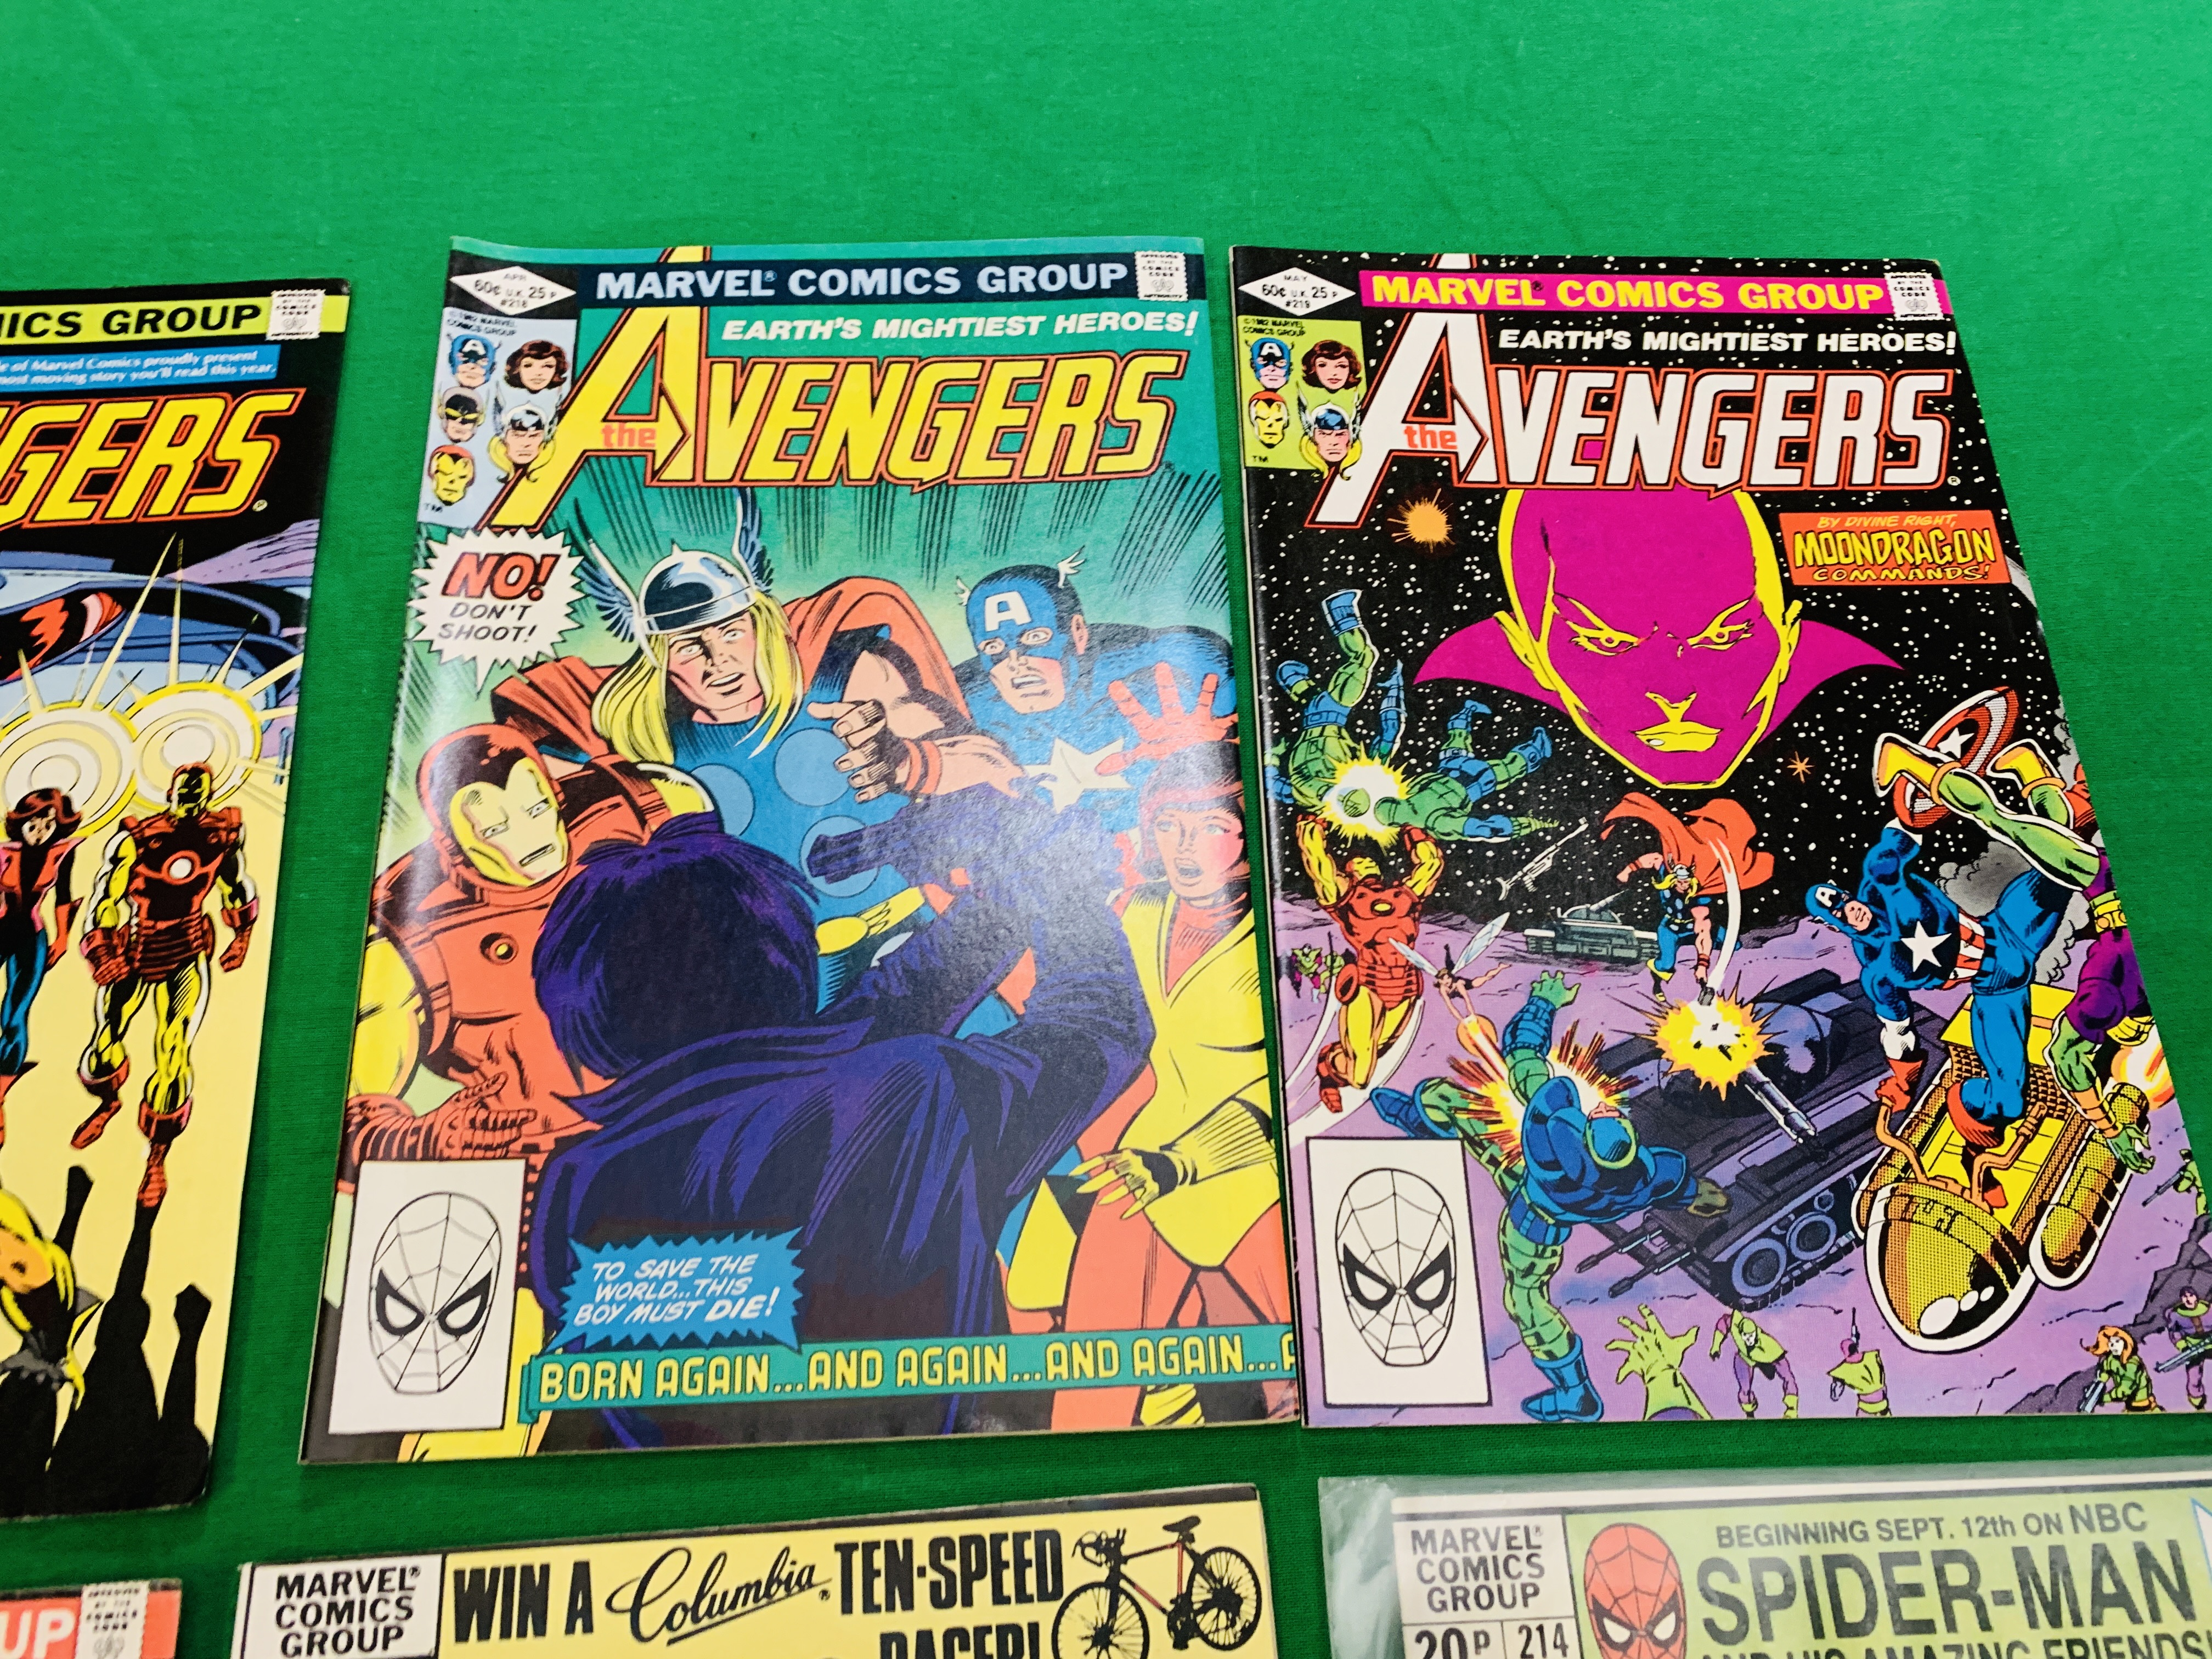 MARVEL COMICS THE AVENGERS NO. 101 - 299, MISSING ISSUES 103 AND 110. - Image 85 of 130